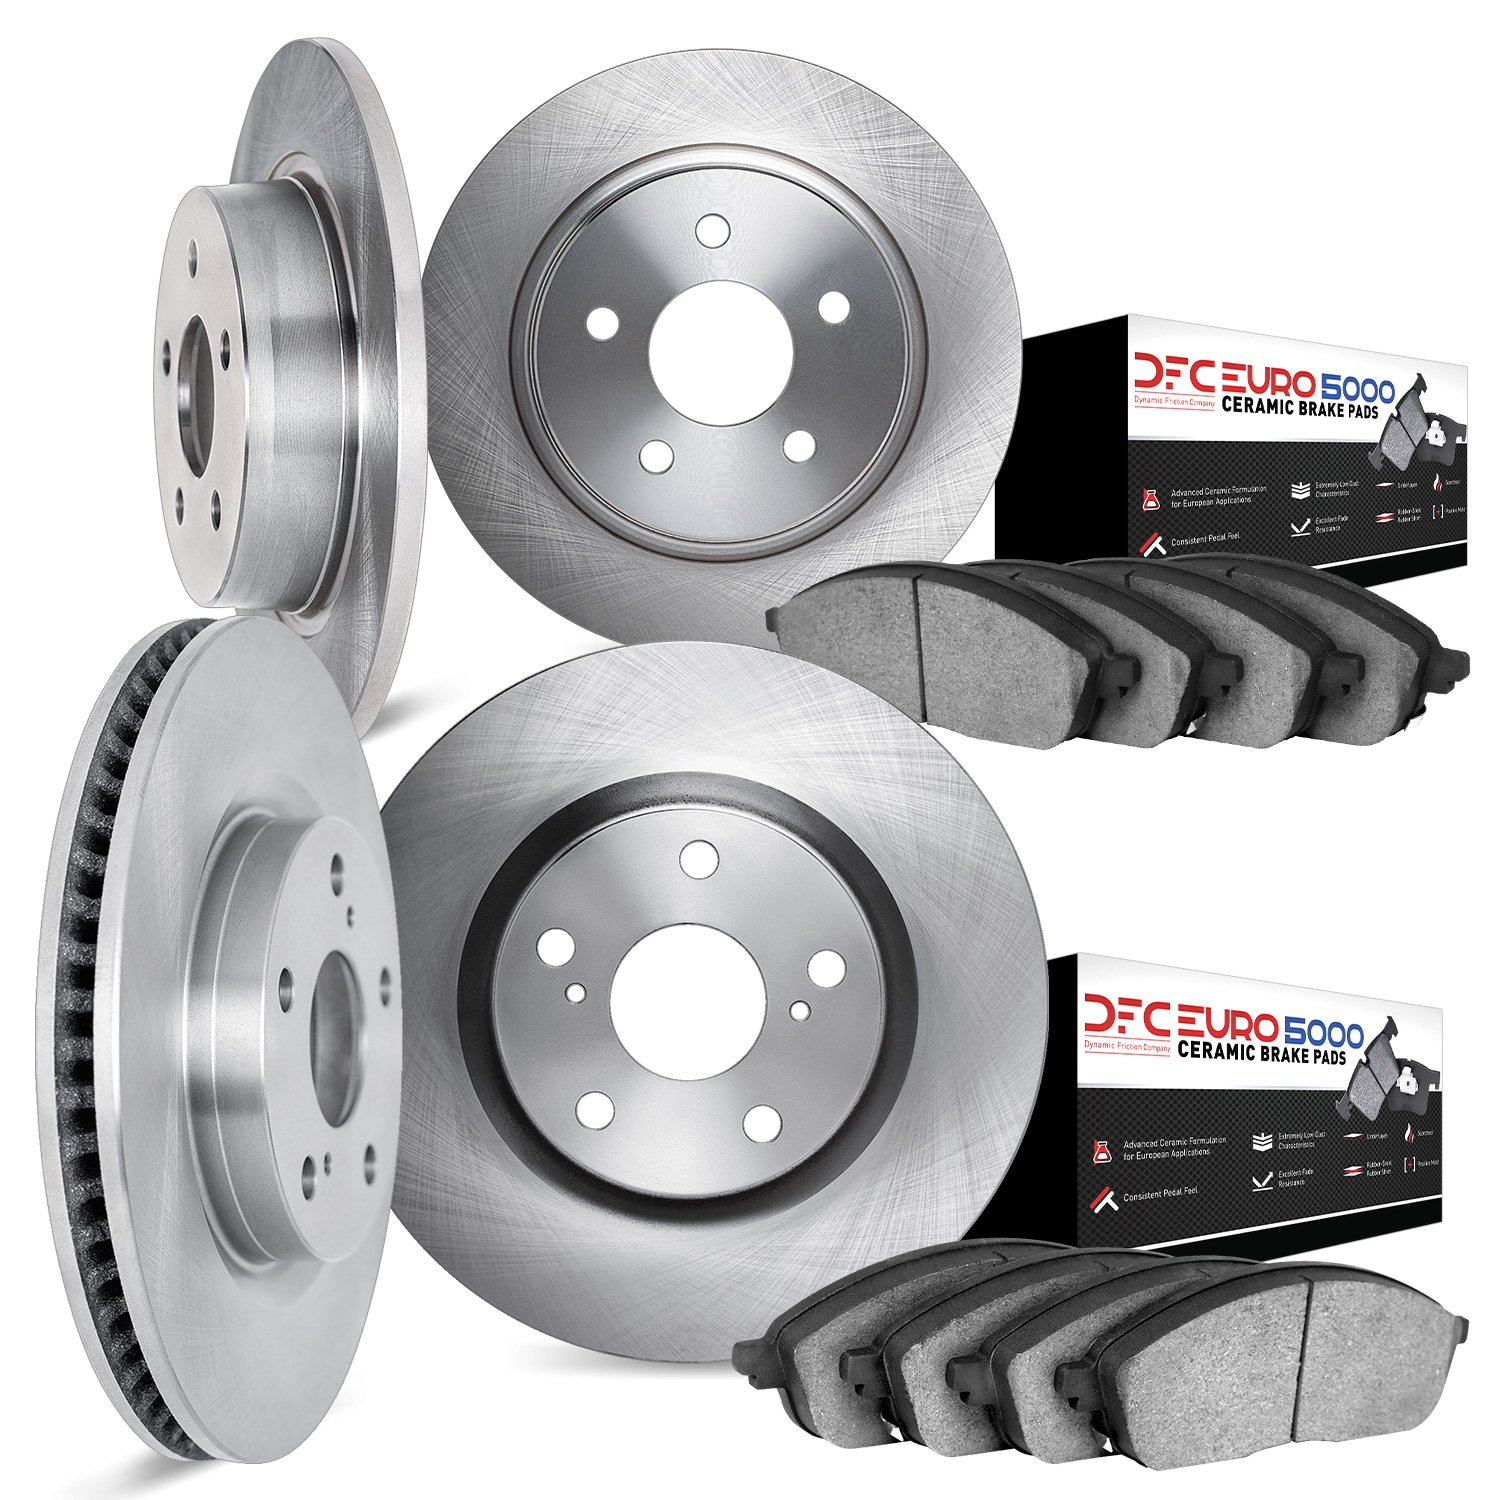 6604-63018 Brake Rotors w/5000 Euro Ceramic Brake Pads, 2001-2009 Mercedes-Benz, Position: Front and Rear